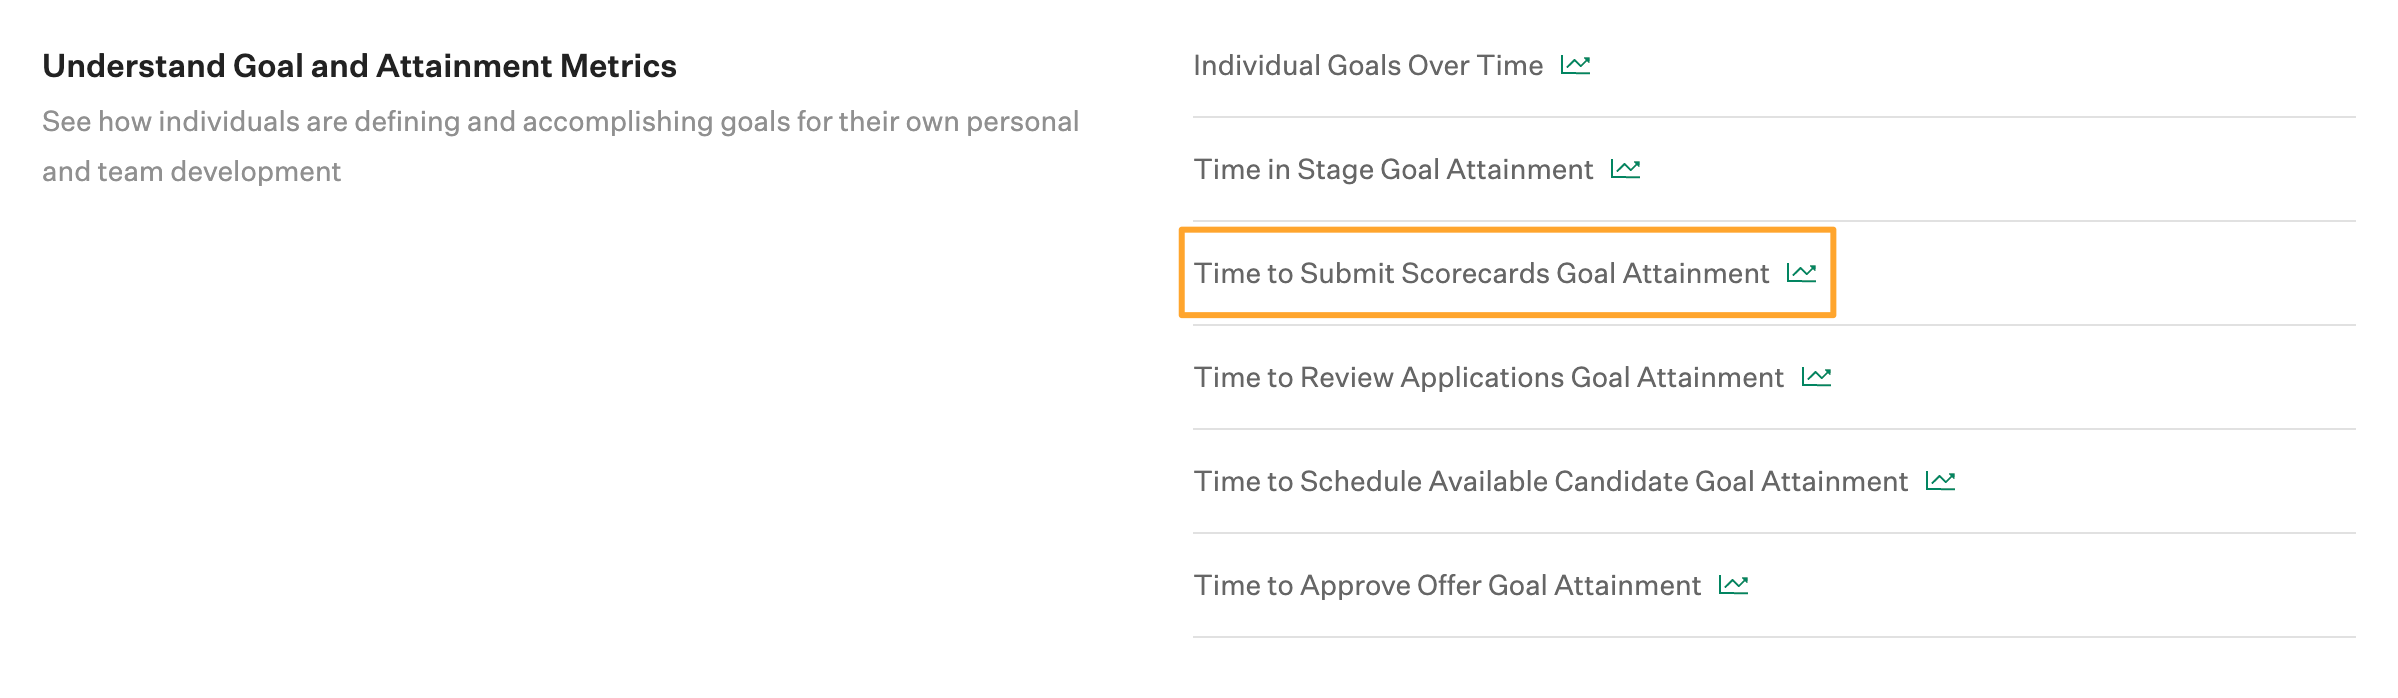 Time-to-submit-scorecards-attainment-report-highlighted-on-the-essential-reports-page.png